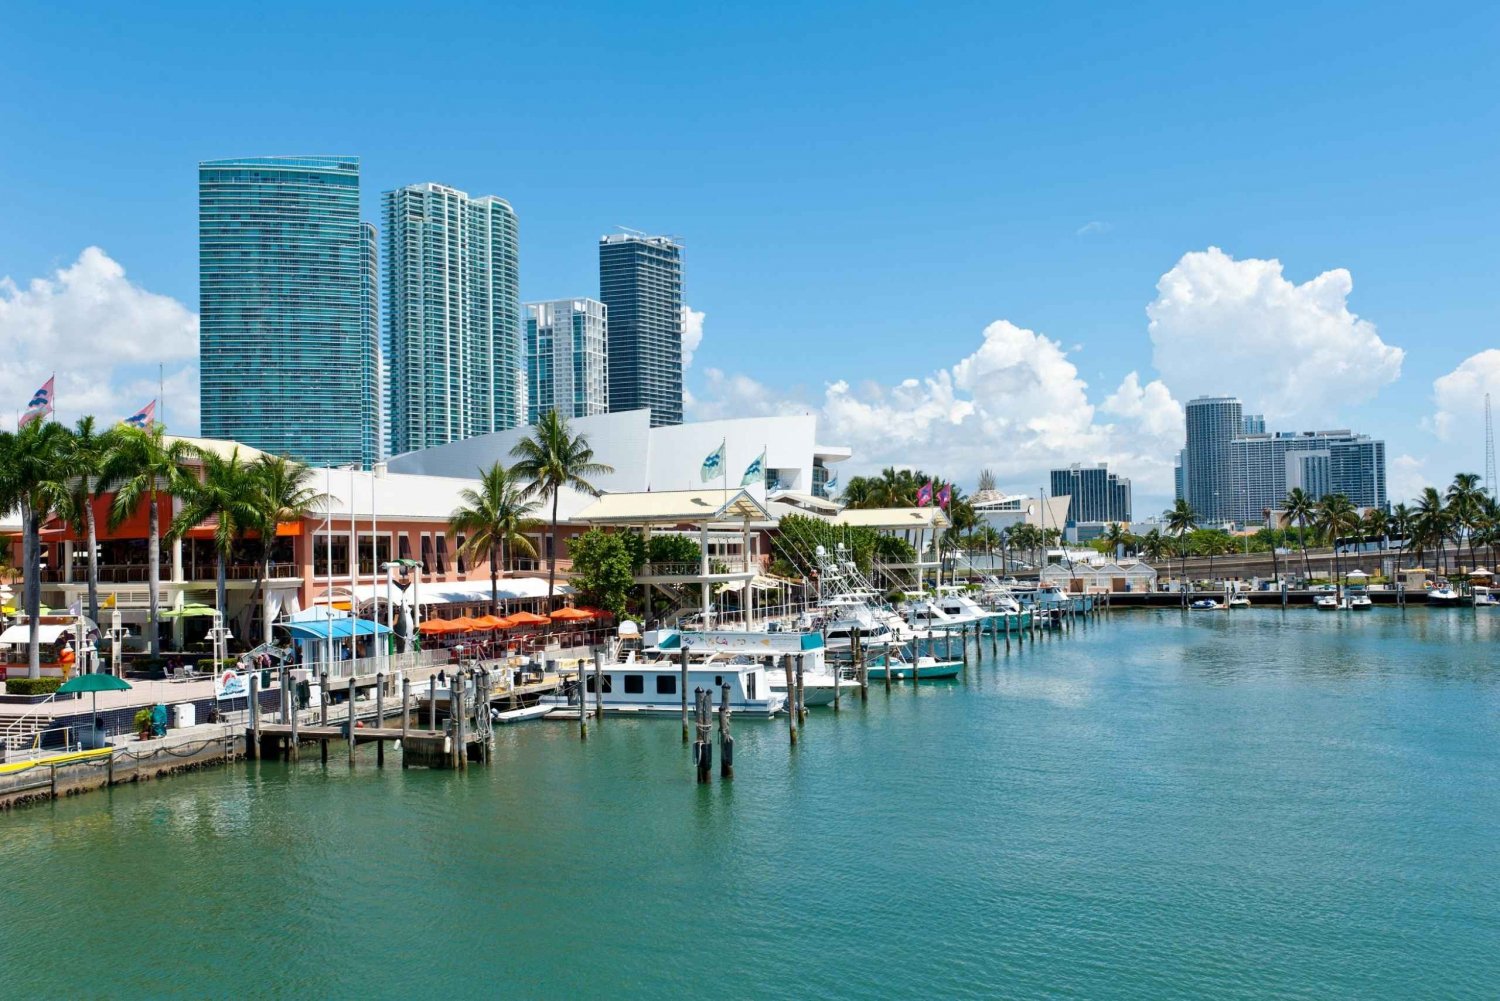 Best Boat Tours In Miami